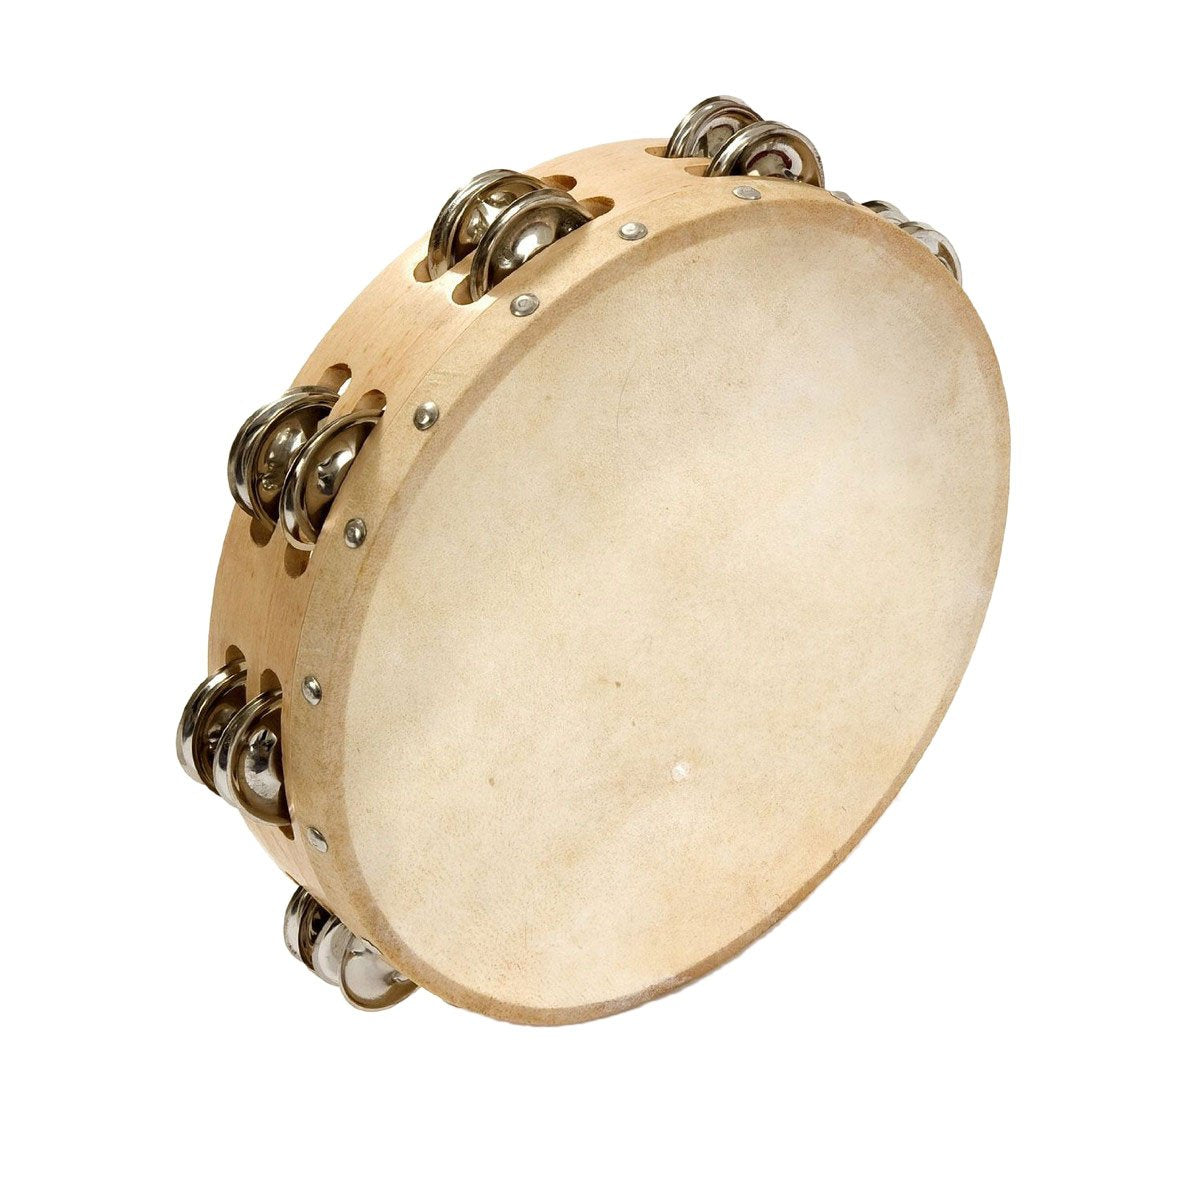 Percussion Plus Tambourine with Double Row of Jingles